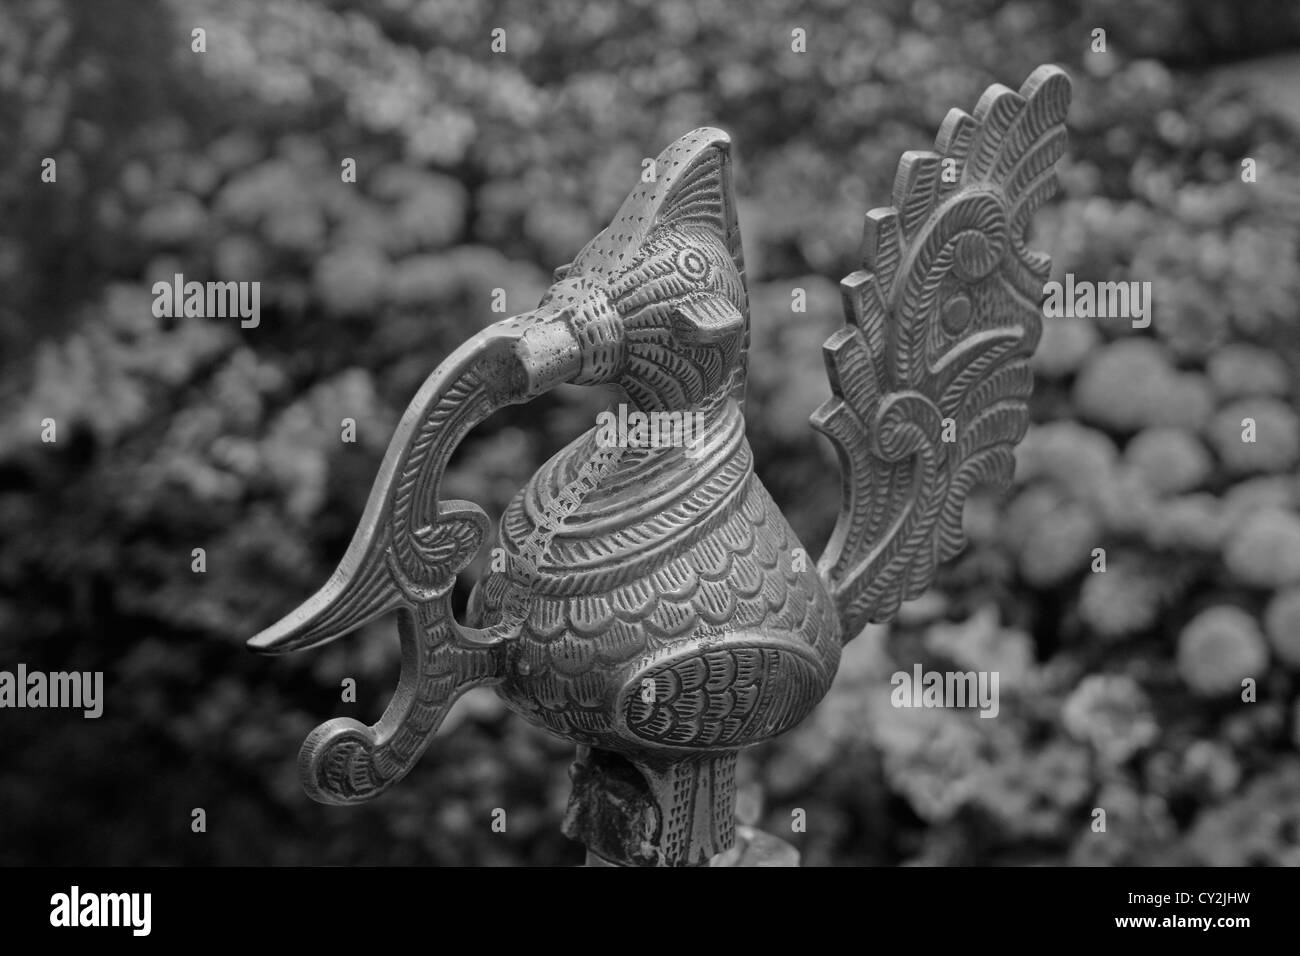 Close-up of a brass oil lamp, India Stock Photo